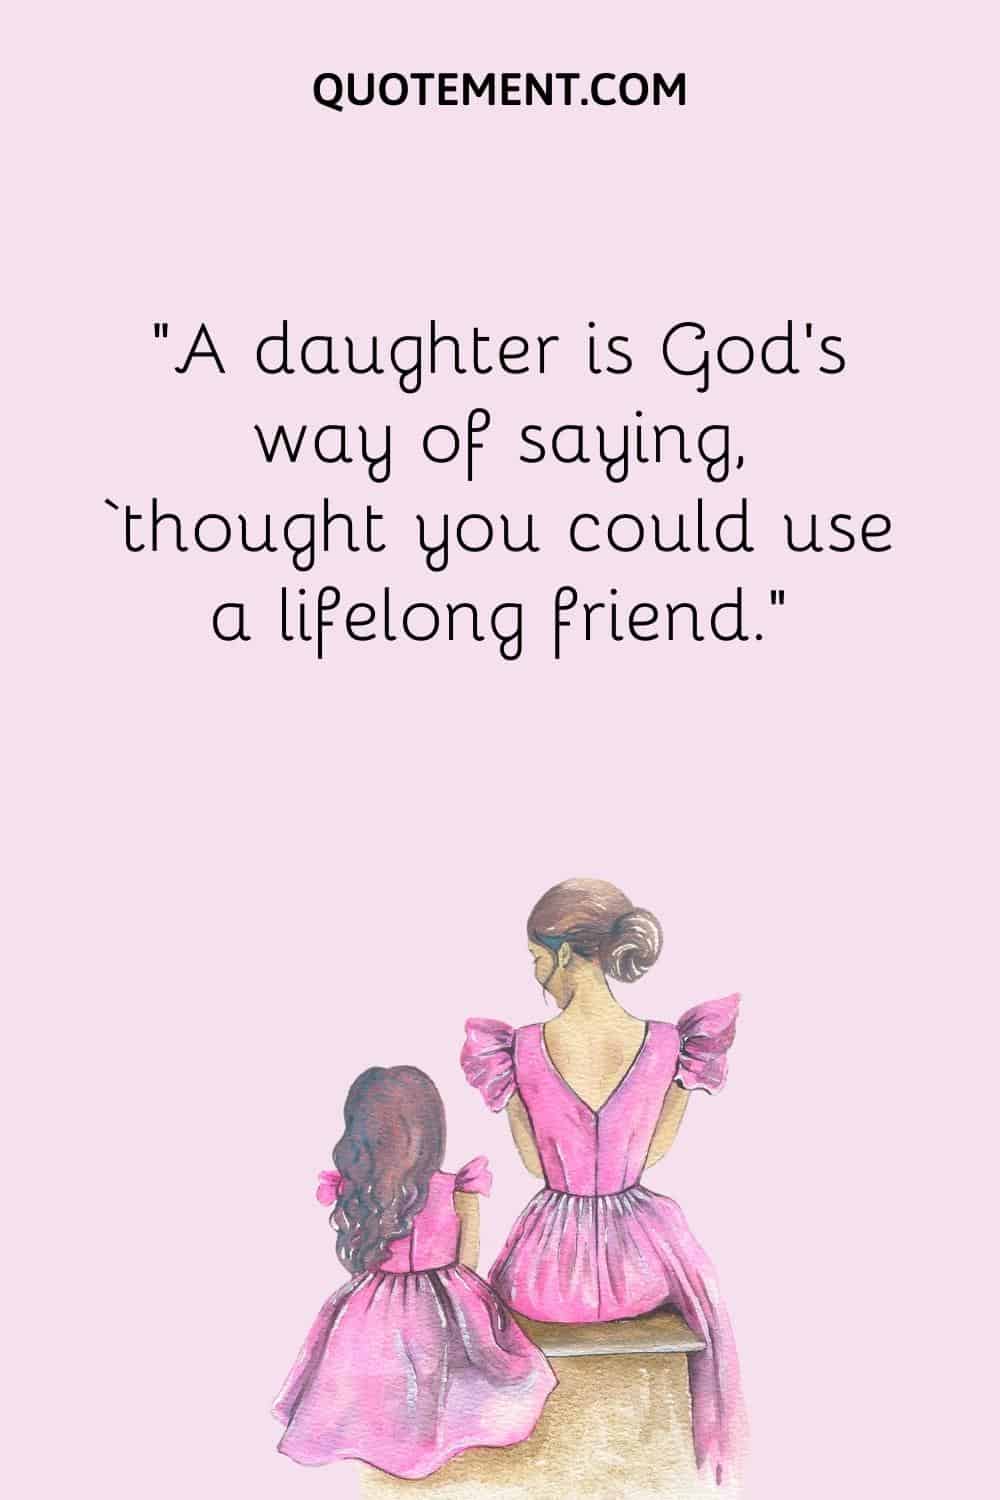 “A daughter is God’s way of saying, ‘thought you could use a lifelong friend.”